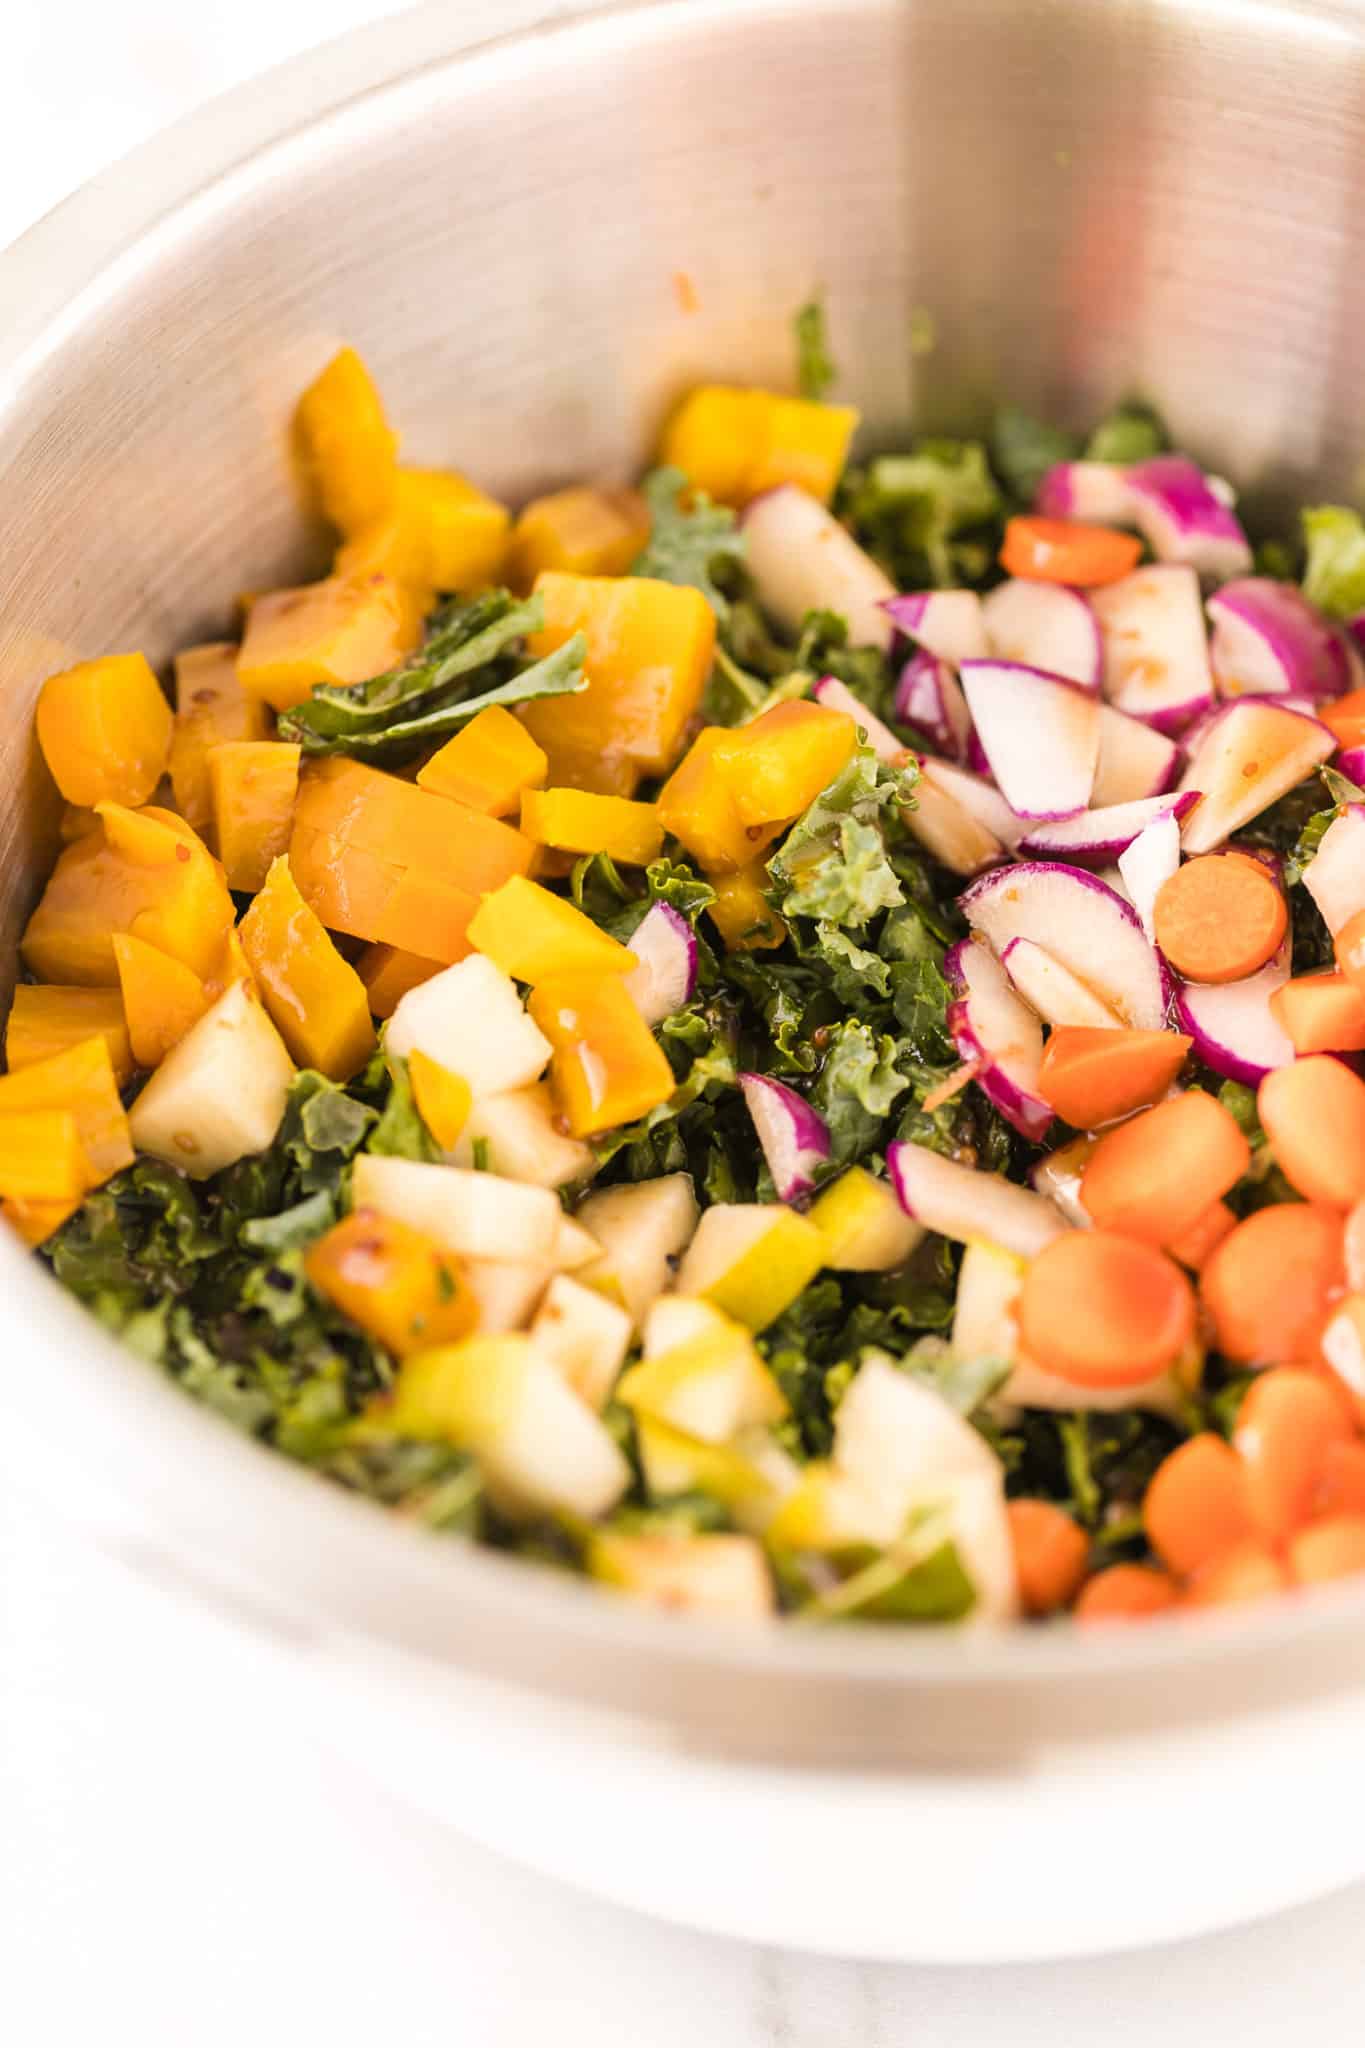 kale salad with winter vegetables tossed together in a bowl